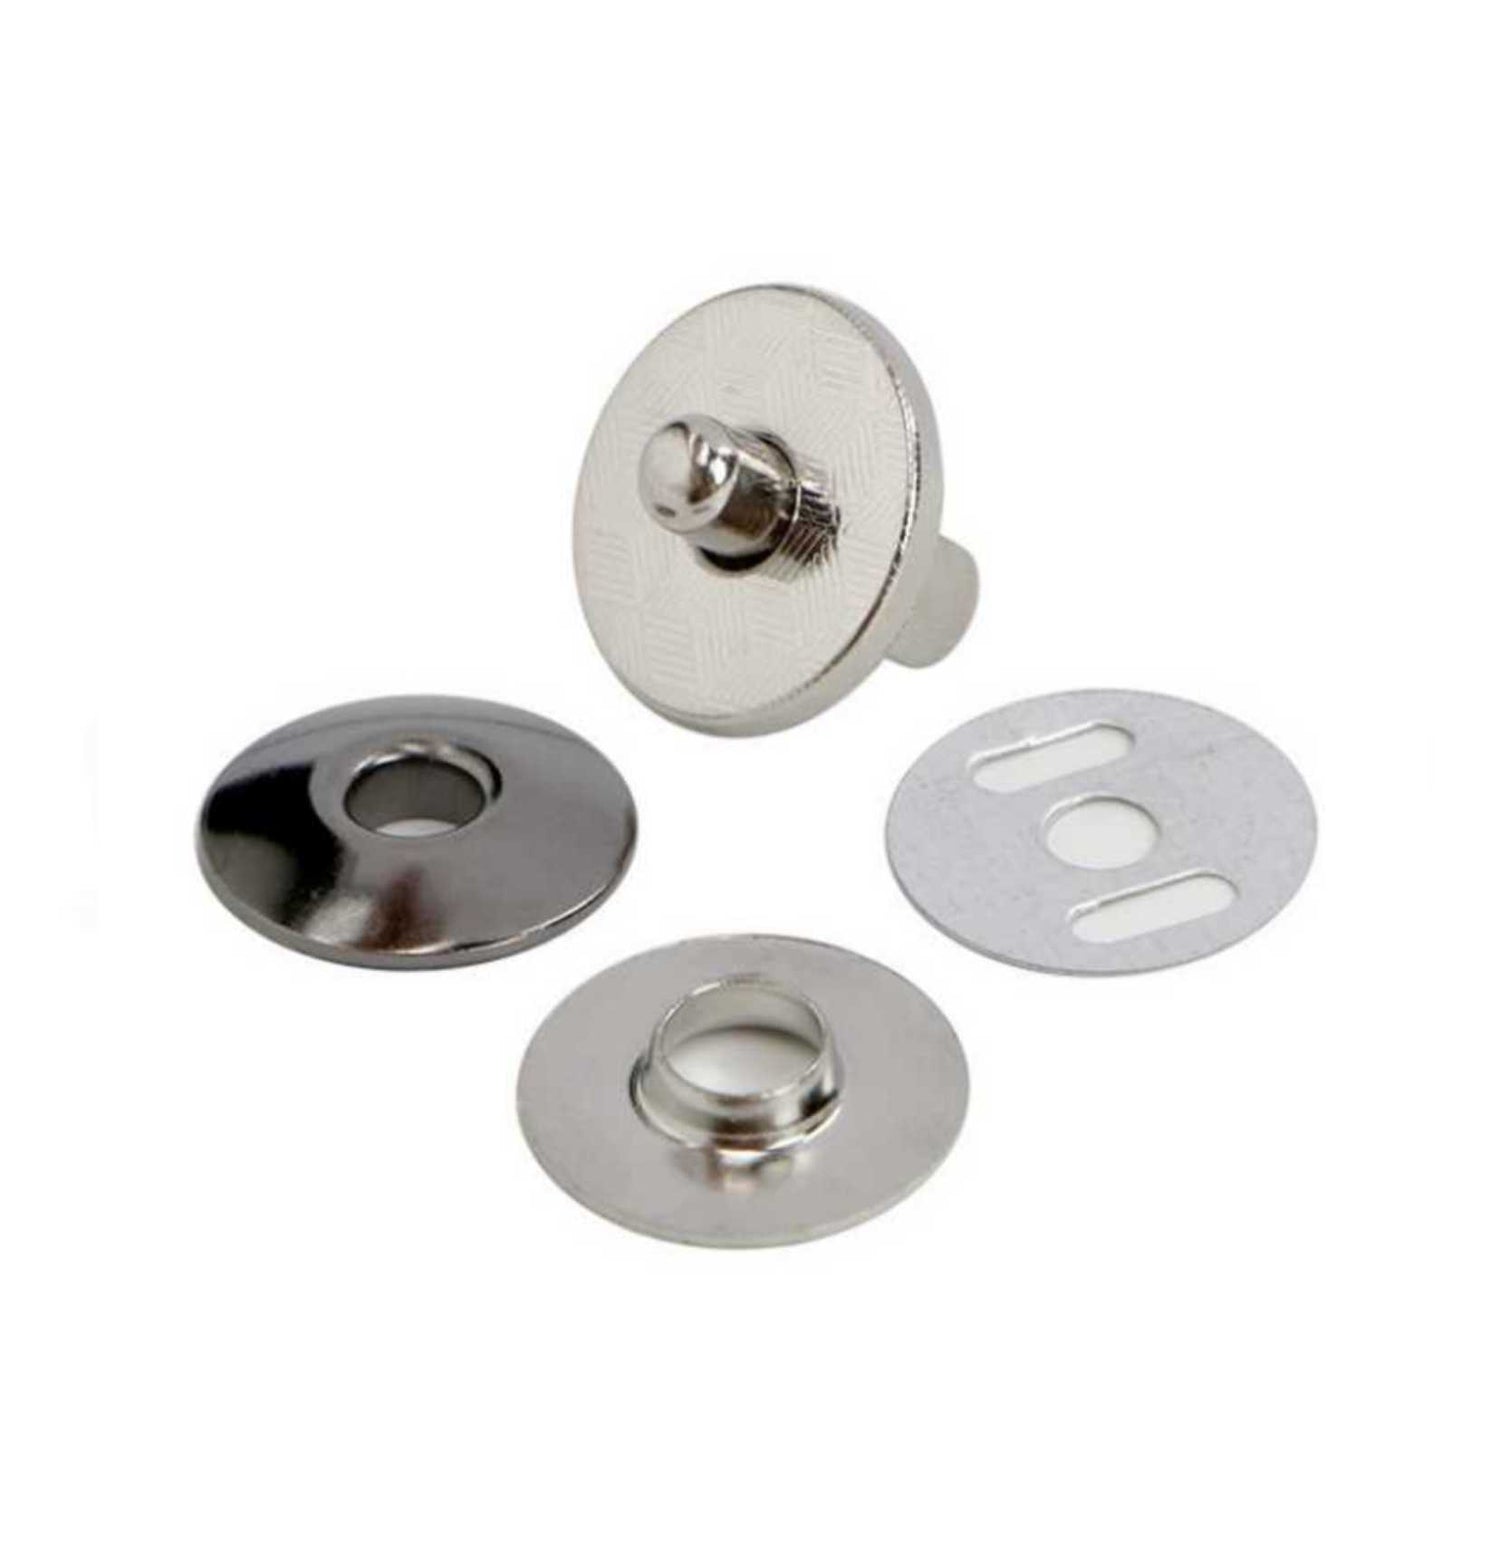 Wholesale Alloy Magnetic Buttons Snap Magnet Fastener 